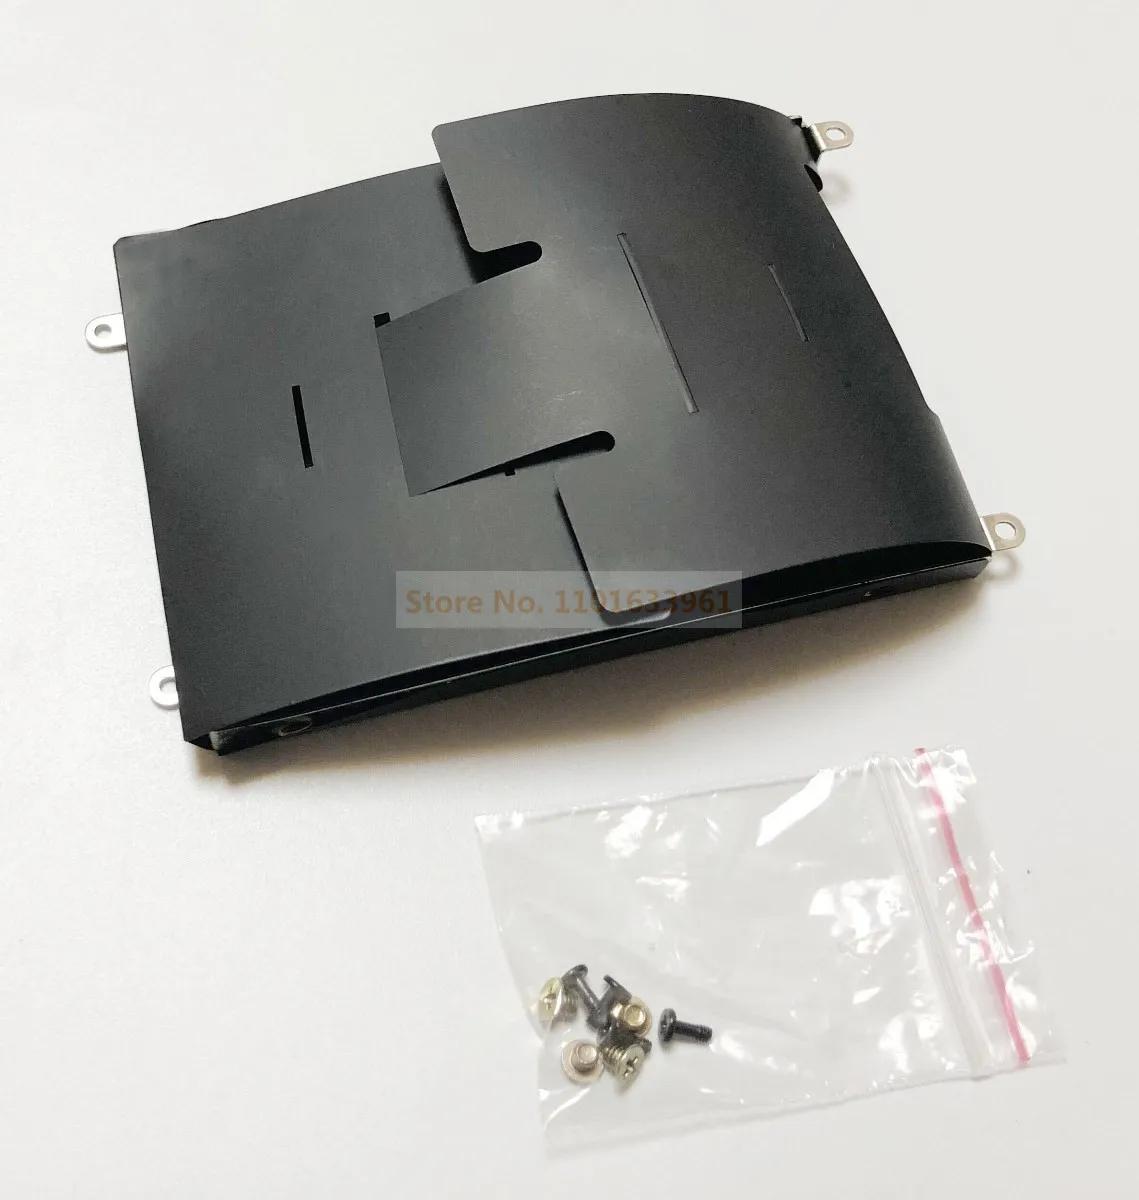 

2.5 Inch HDD SSD SATA Hard Disk Drive Caddy Frame Tray Bracket + Screws for HP ProBook 4340s 4540s 4545s 4740s 4445s 4440s